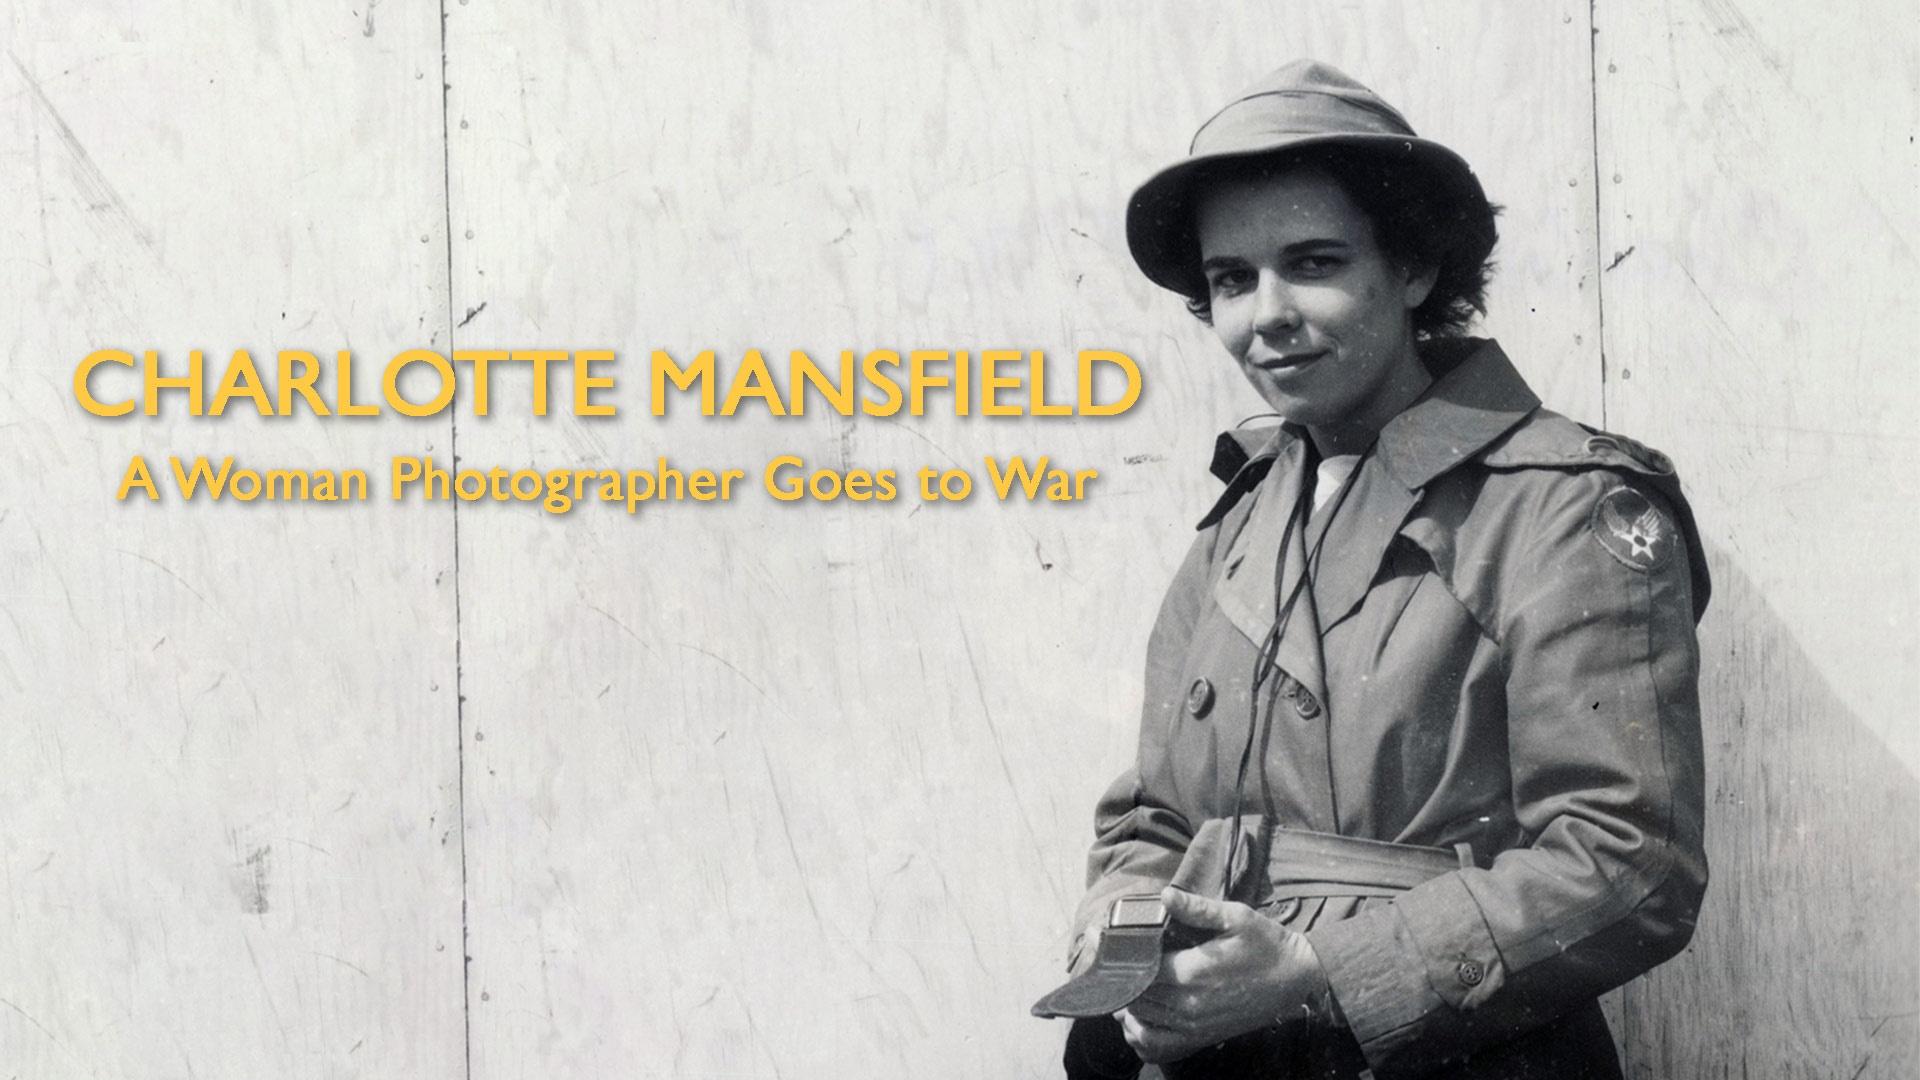 Charlotte Mansfield: A Woman Photographer Goes to War